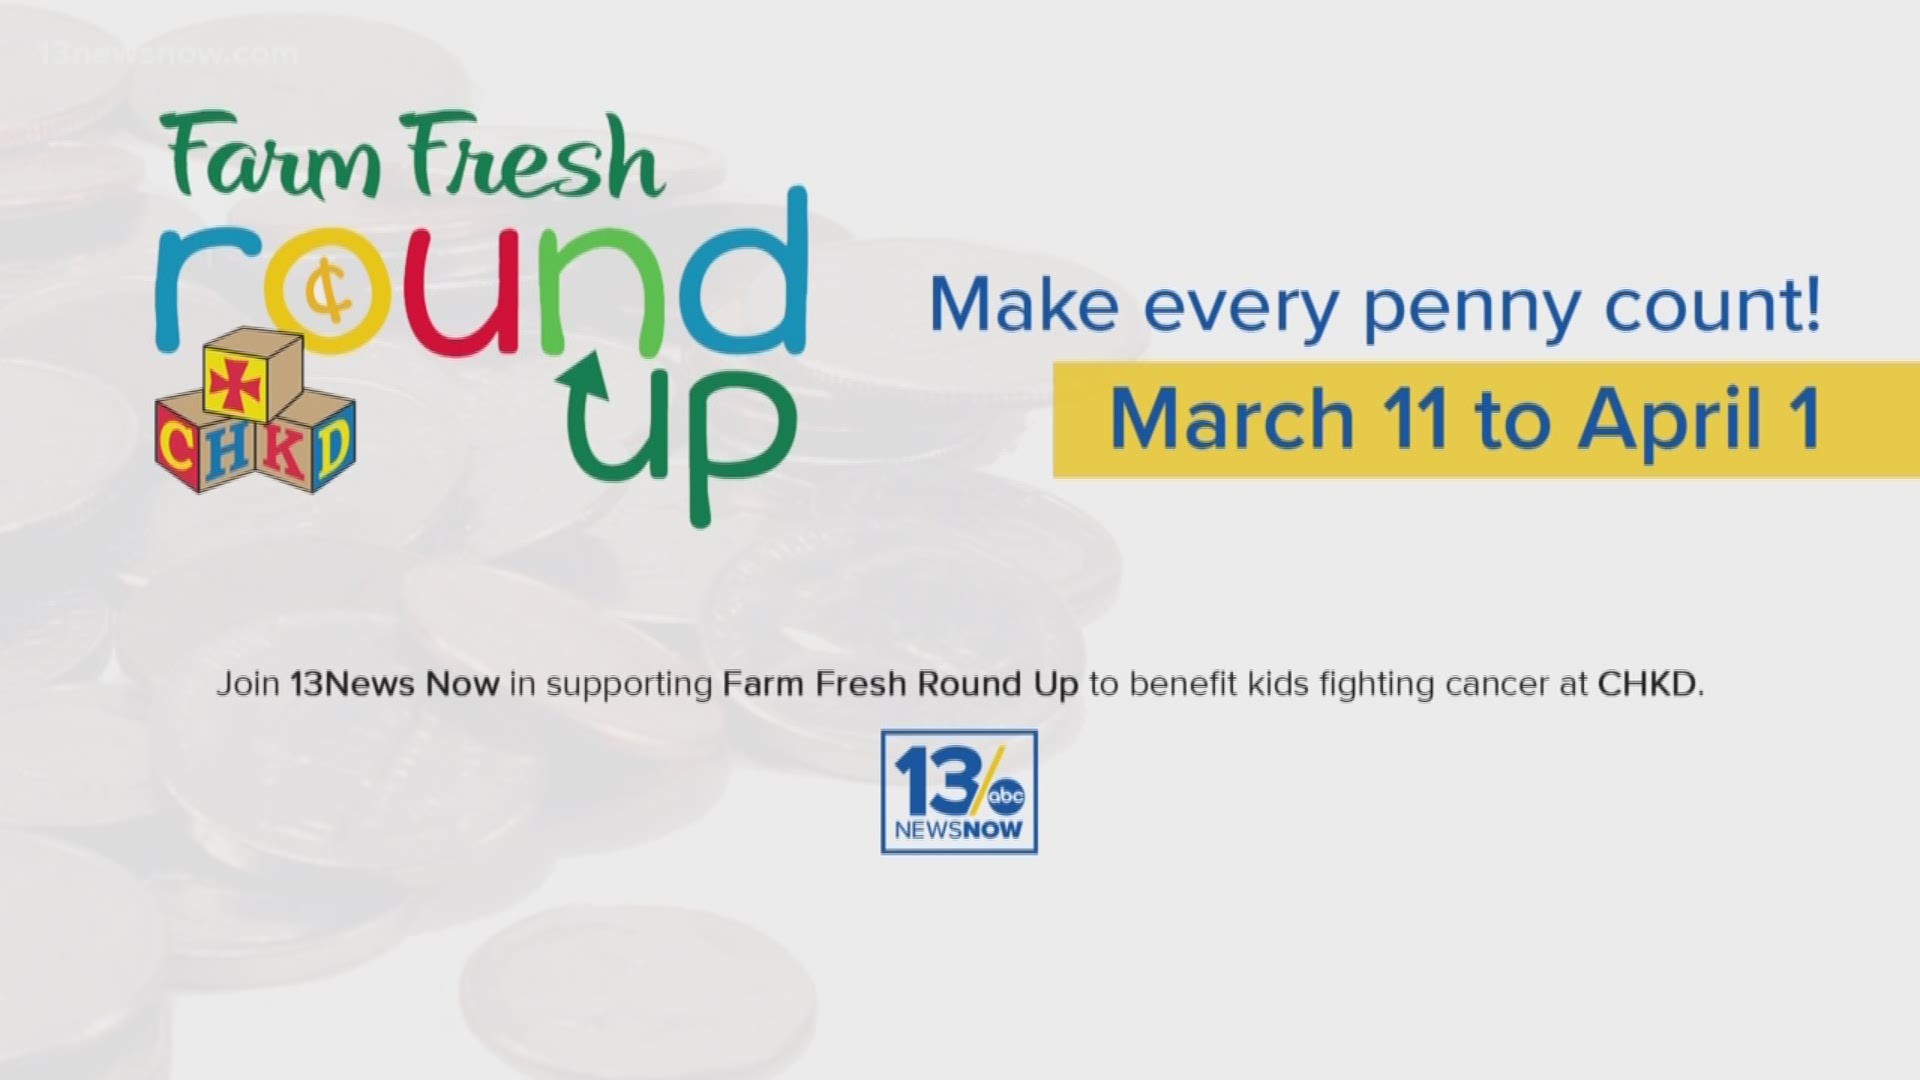 The annual CHKD Round Up takes place at Farm Fresh stores and benefits cancer research at Children's Hospital of The King's Daughters.